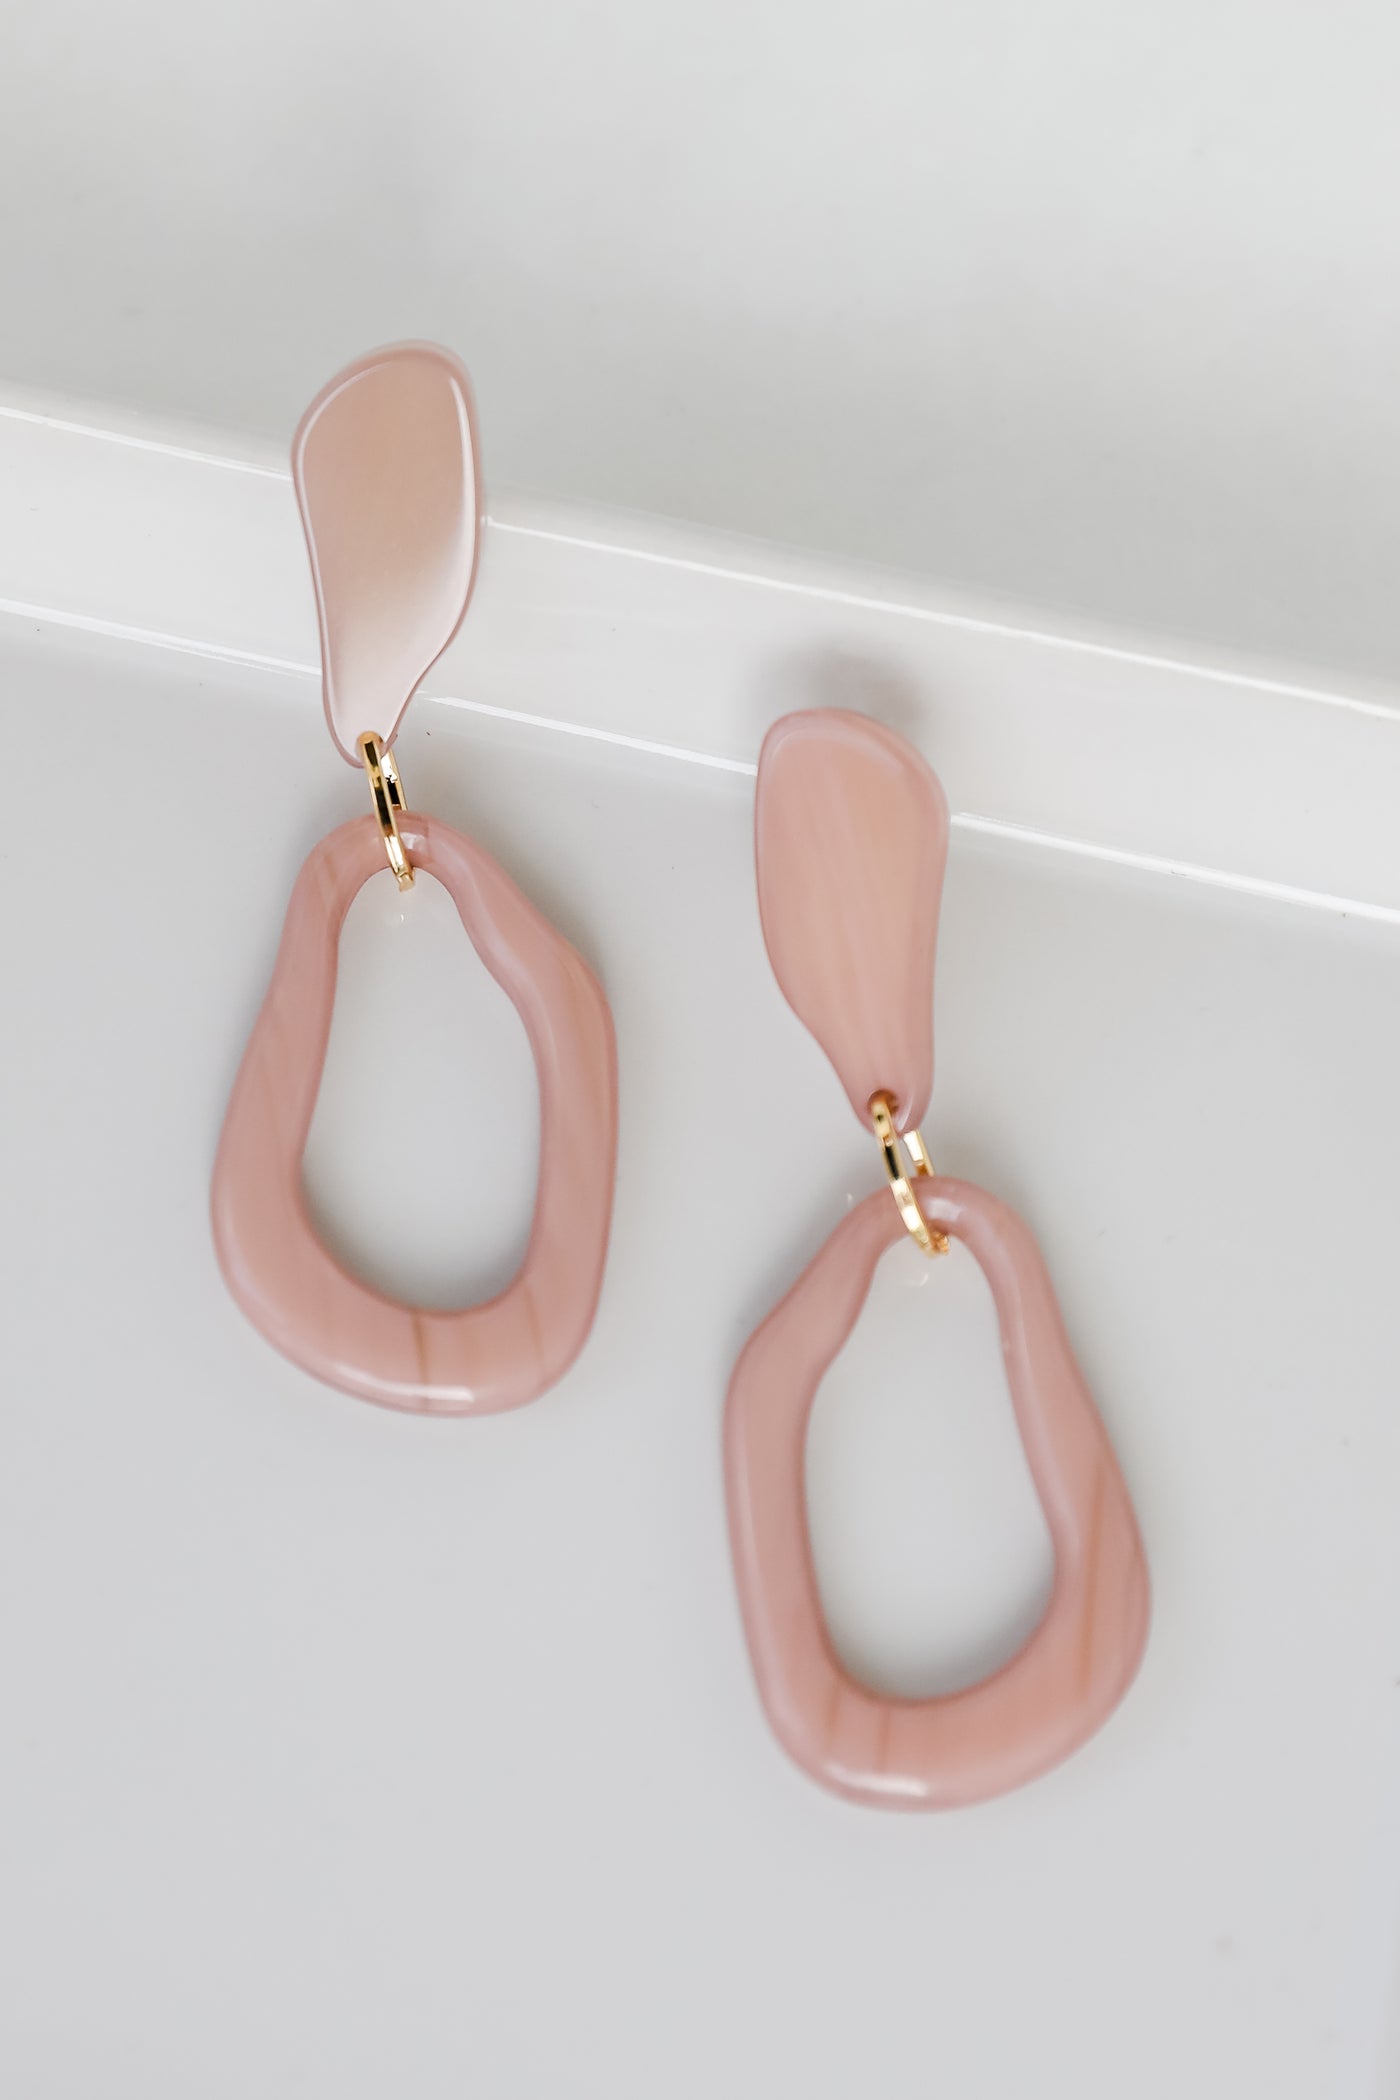 Acrylic Statement Earrings in taupe flat lay